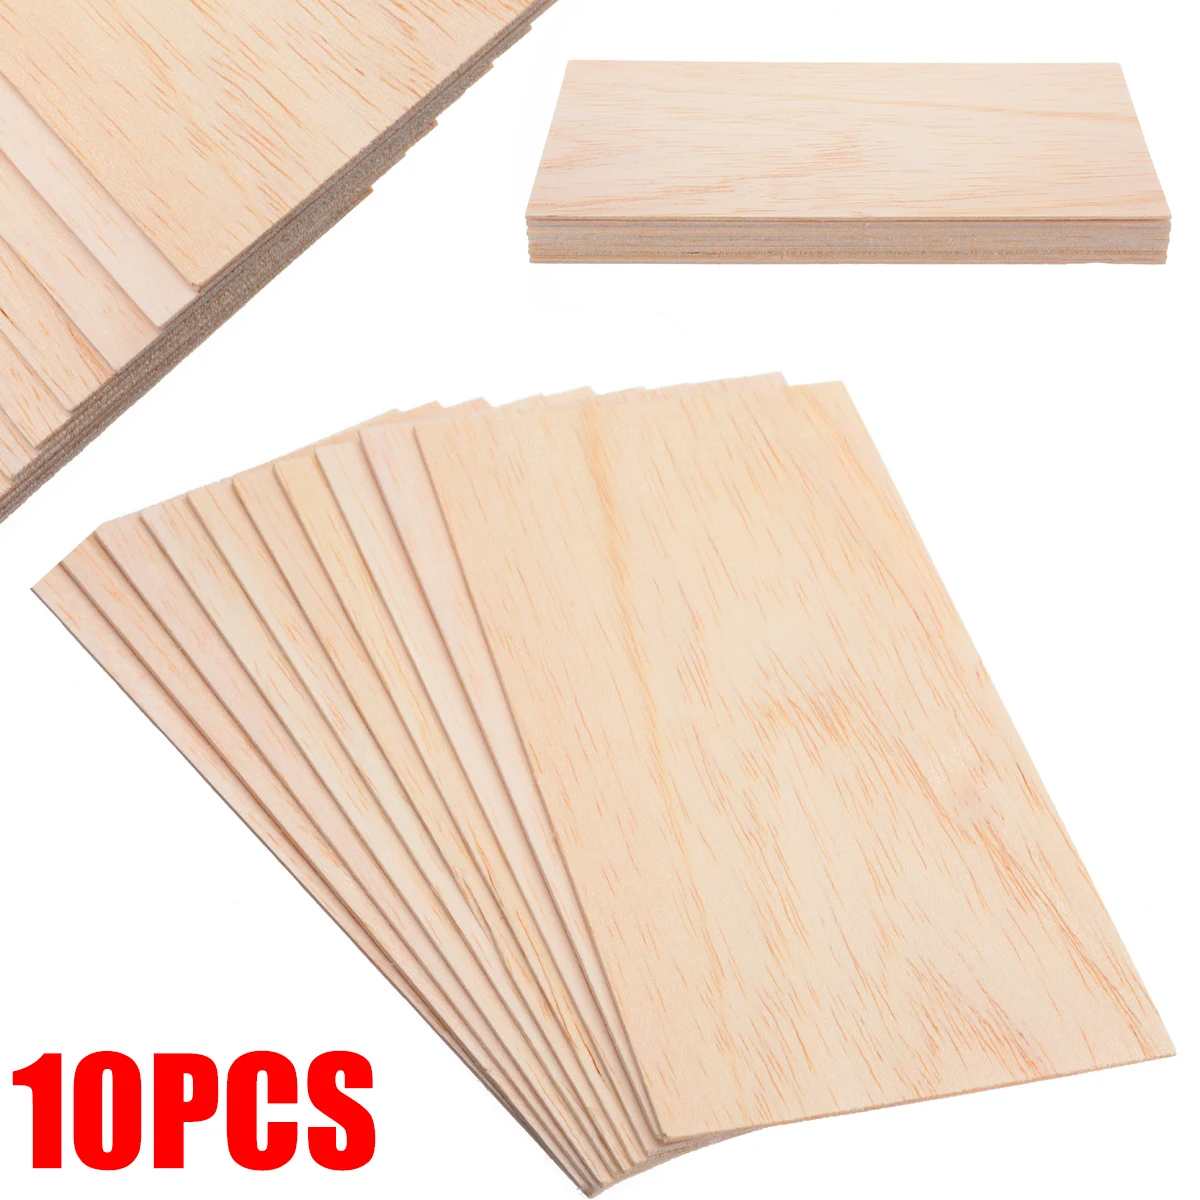 10 Pieces Balsa Wooden Plate Sheet Wooden Plywood for DIY House Ship Craft Model 